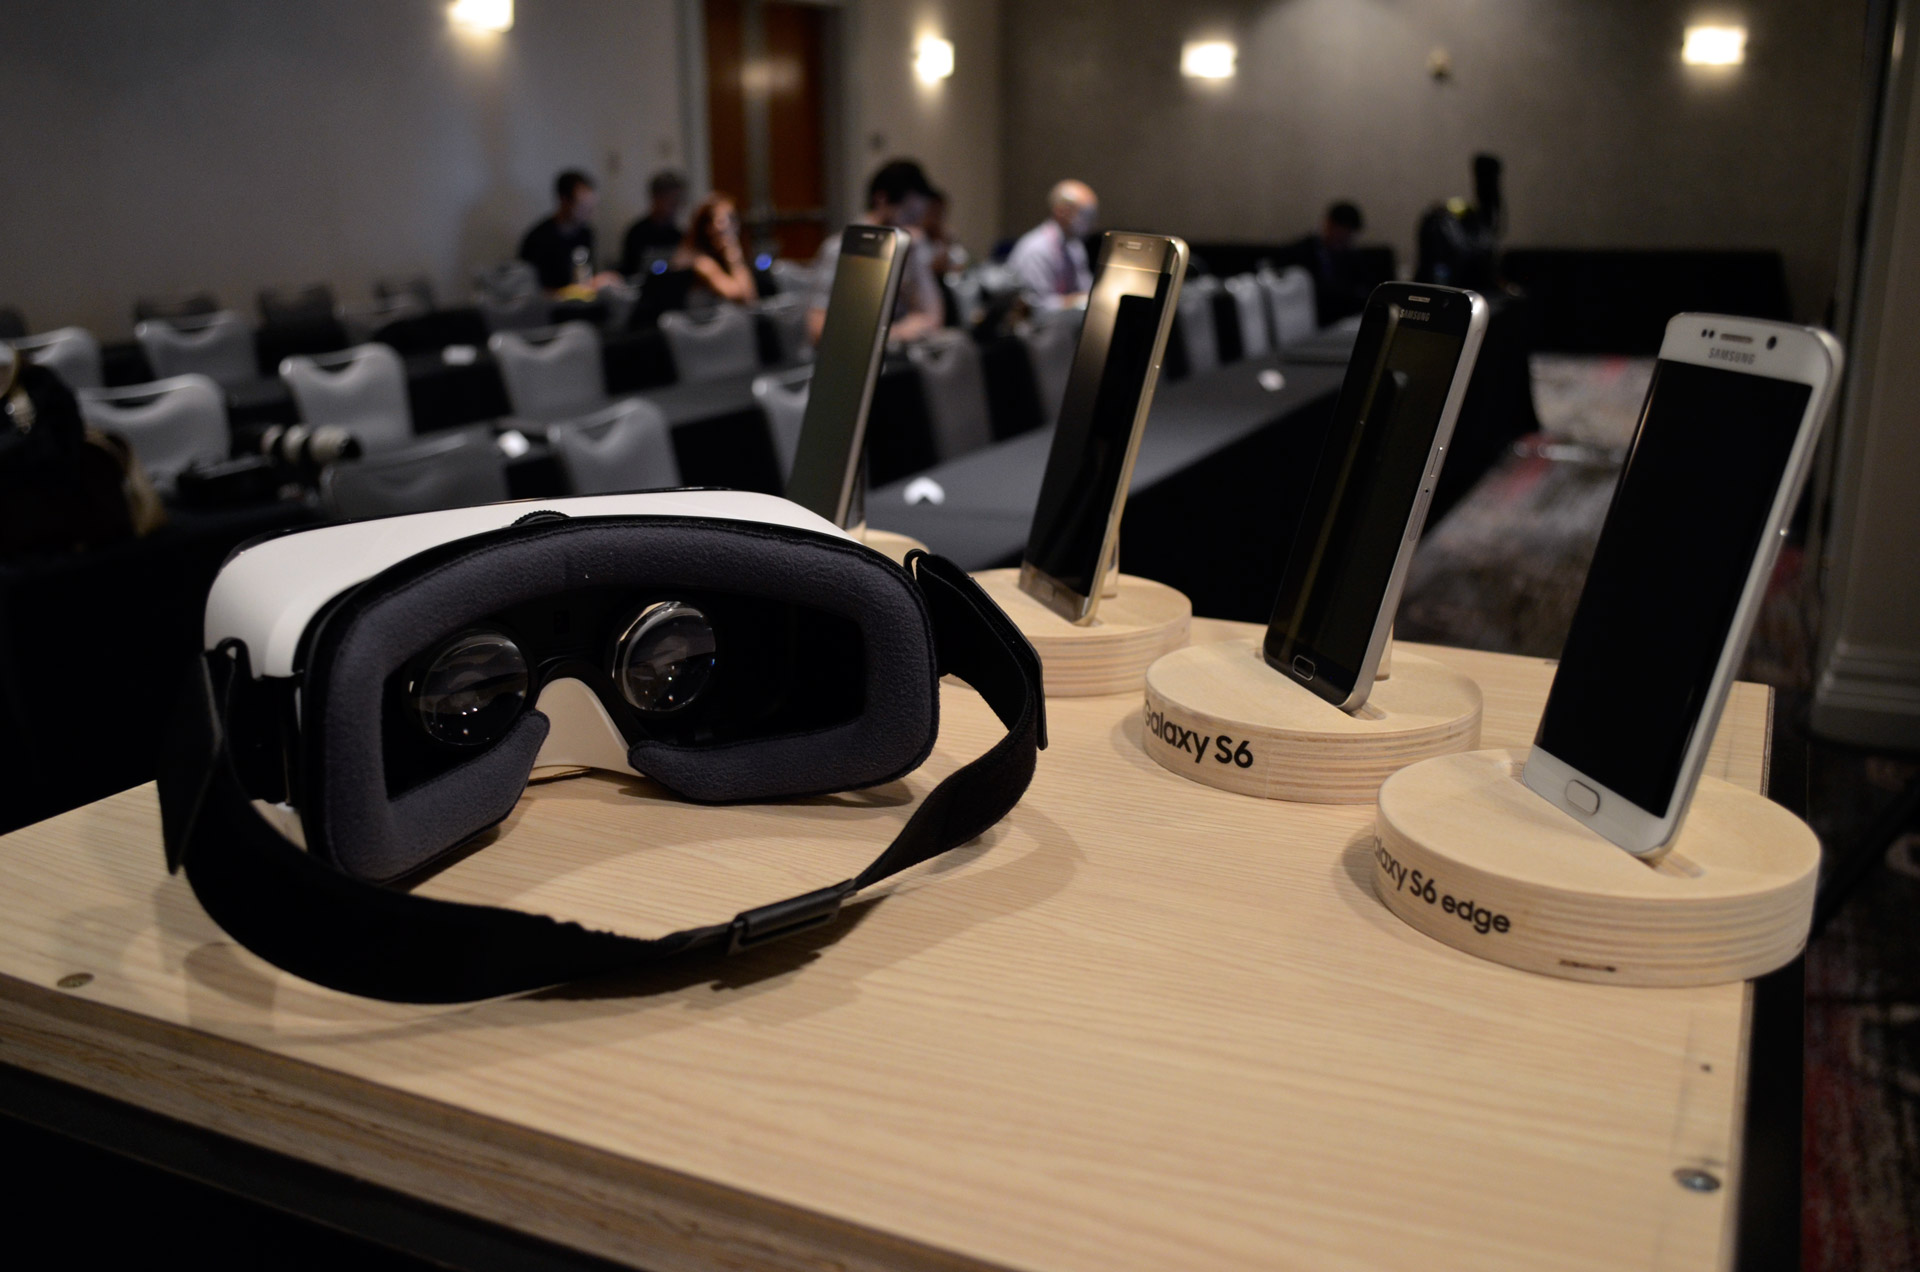 First Look Samsung's Consumer VR Headset – to VR